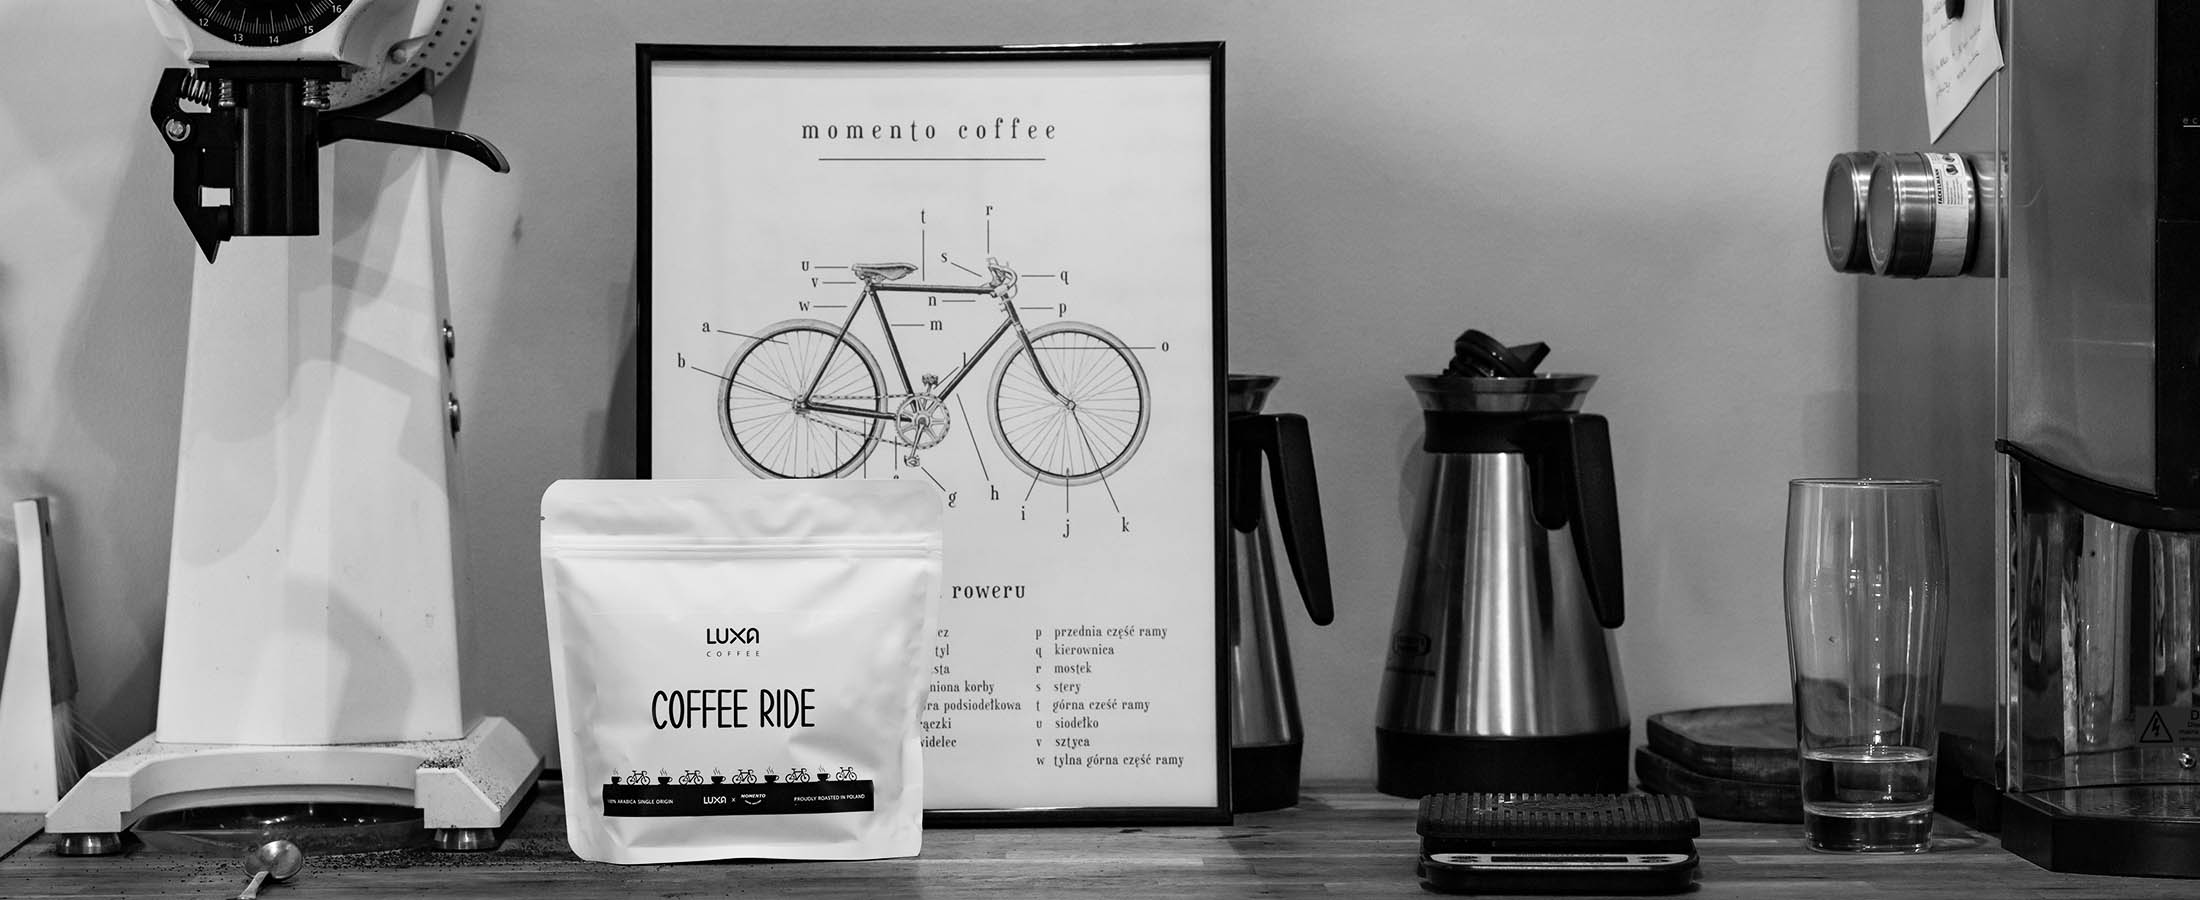 interior of a cafe with an atmospheric picture with a bicycle and coffee for cyclists Luxa Coffee Ride from the Momento roaster in Rzeszów